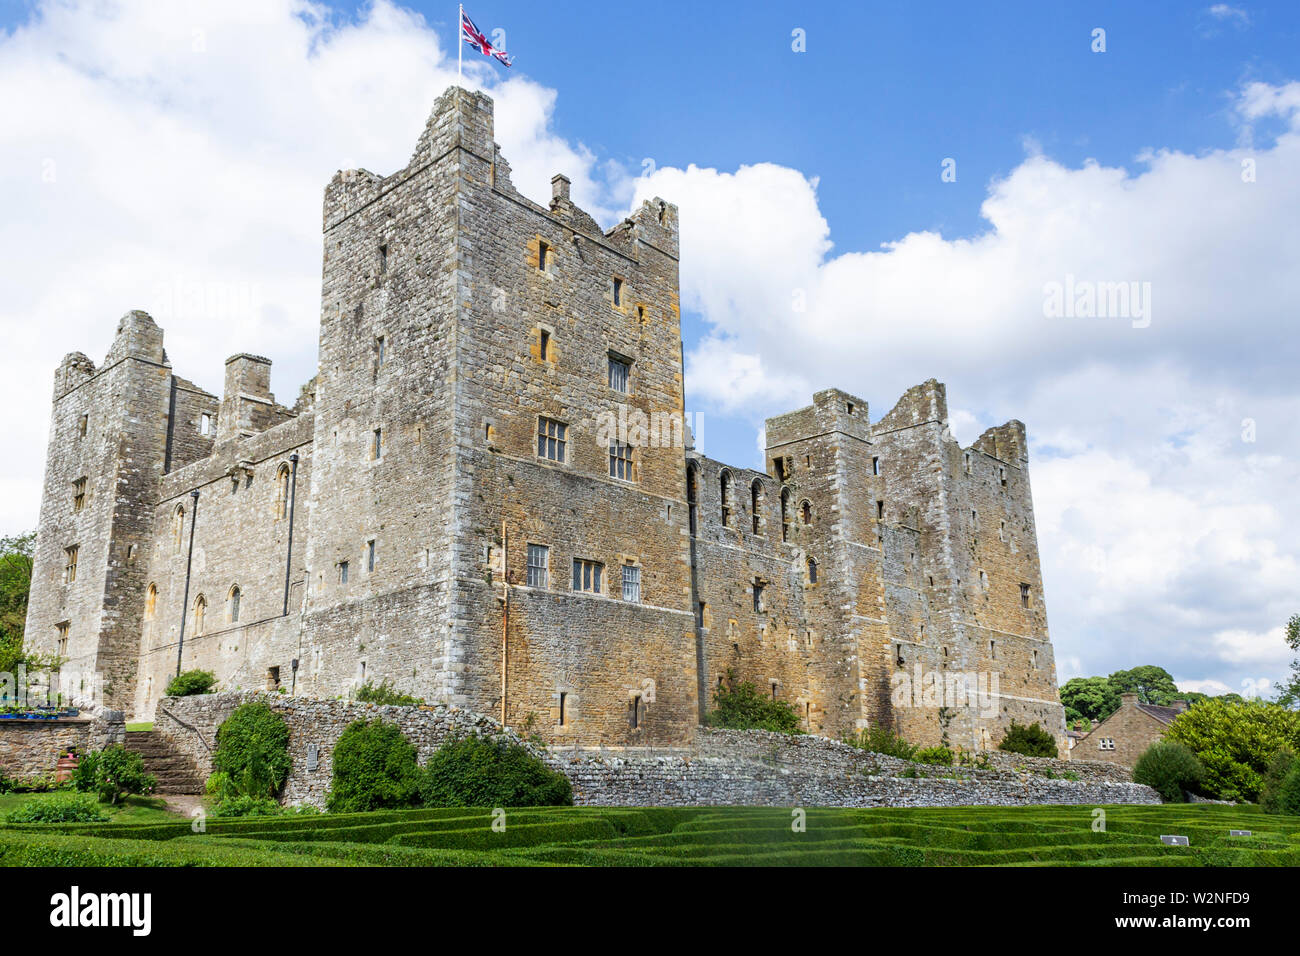 Bolton Castle, Wensleydale, Yorkshire, England. Mary, Queen of Scots was held prisoner at Bolton for six months in 1568. Stock Photo